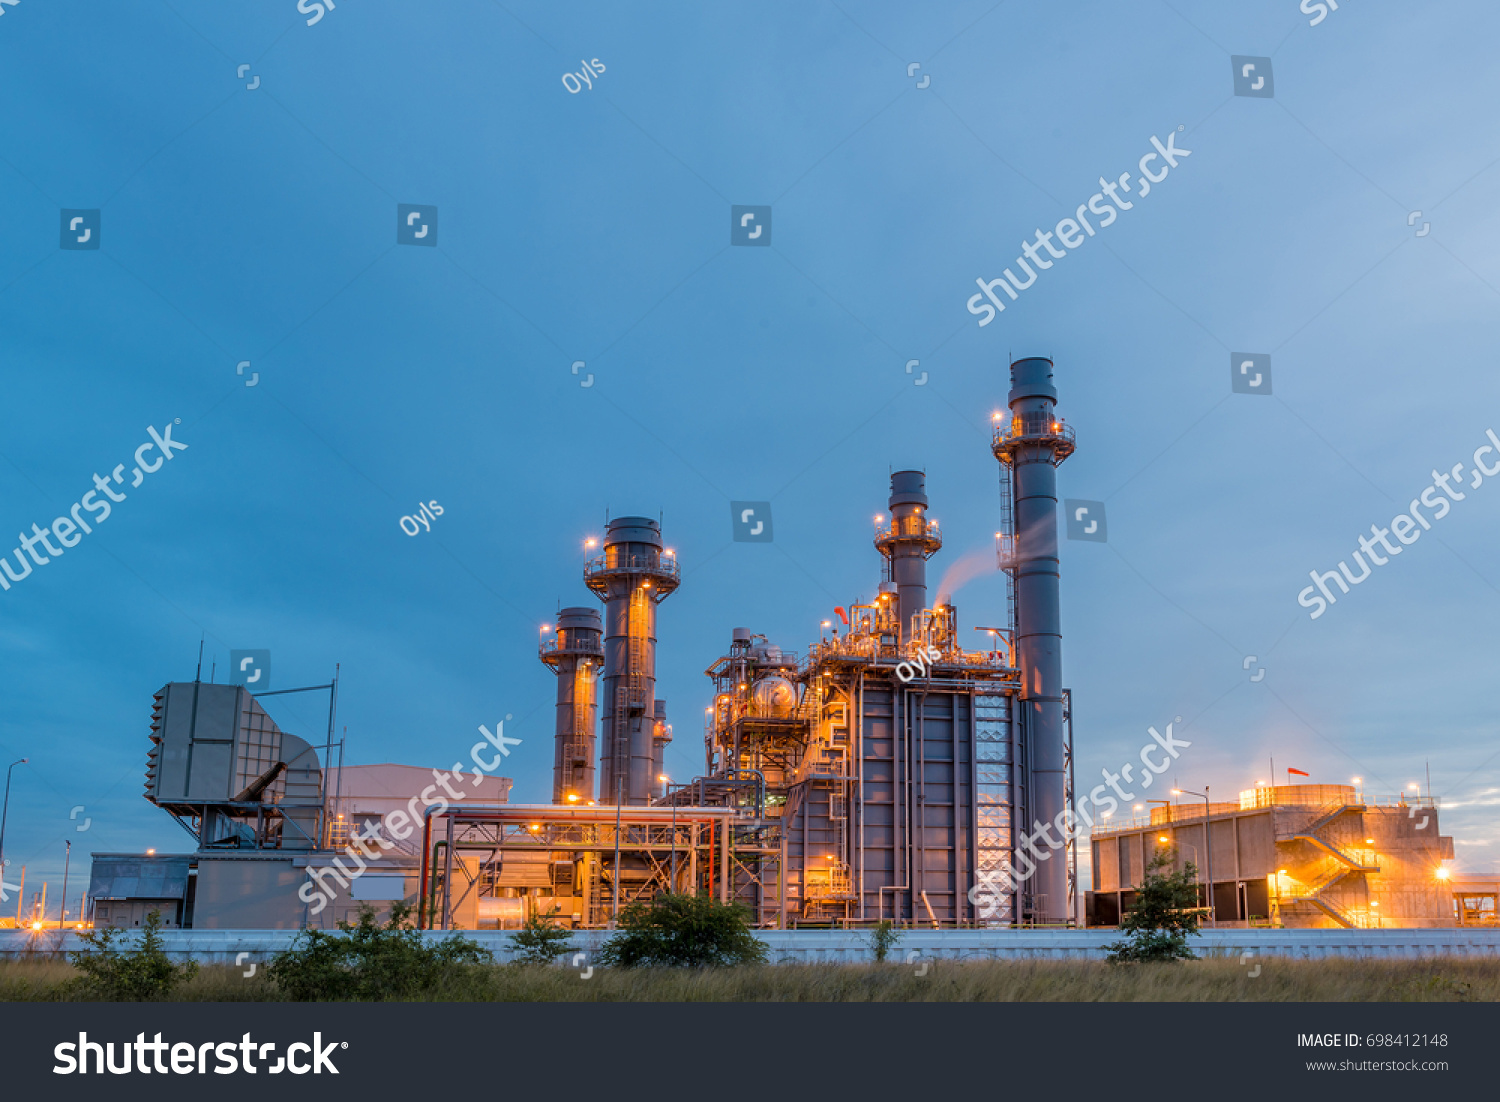 Oil and gas refinery, industry #698412148